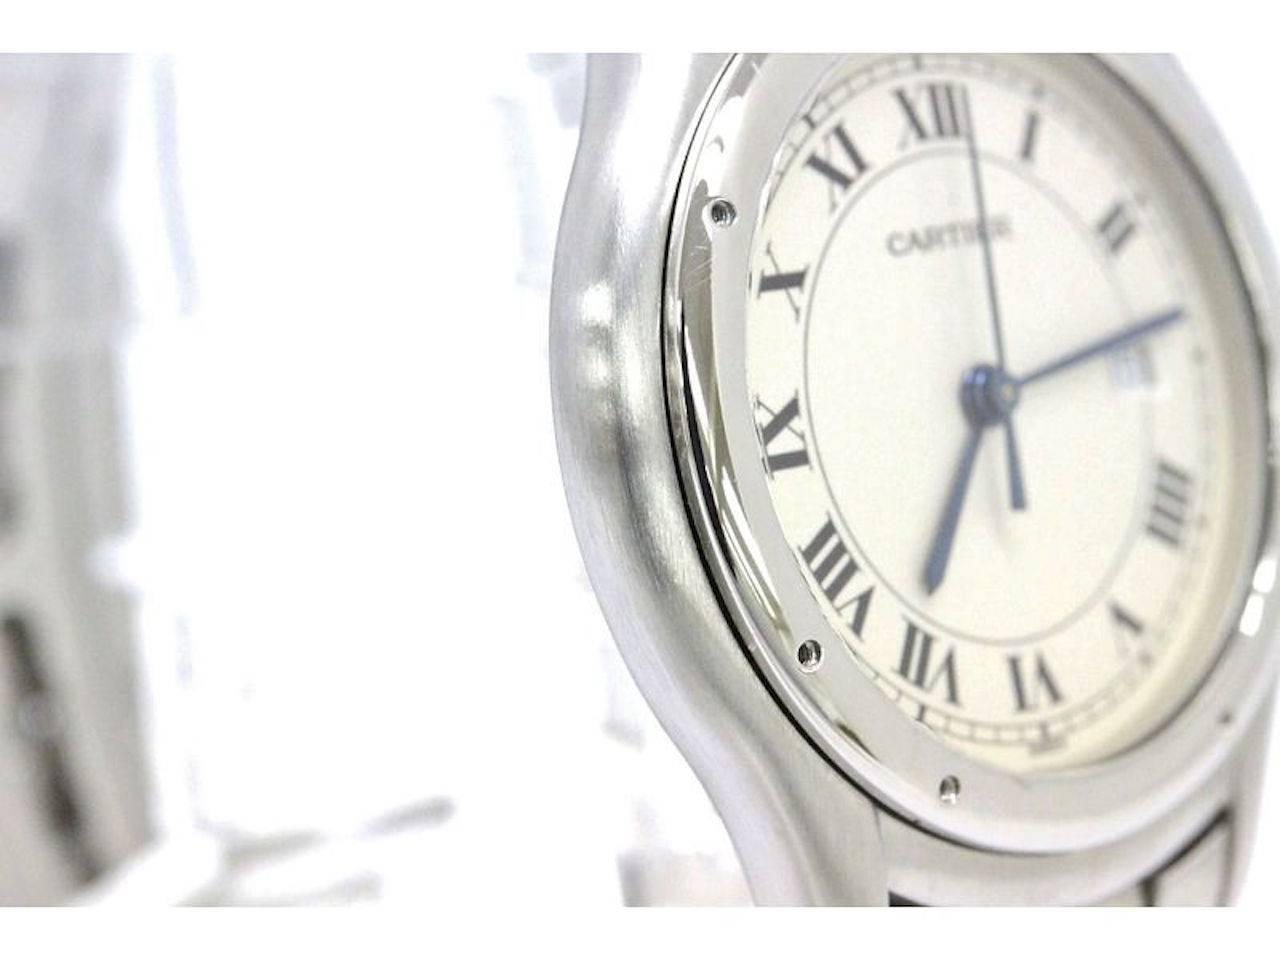 cartier panthere watch round